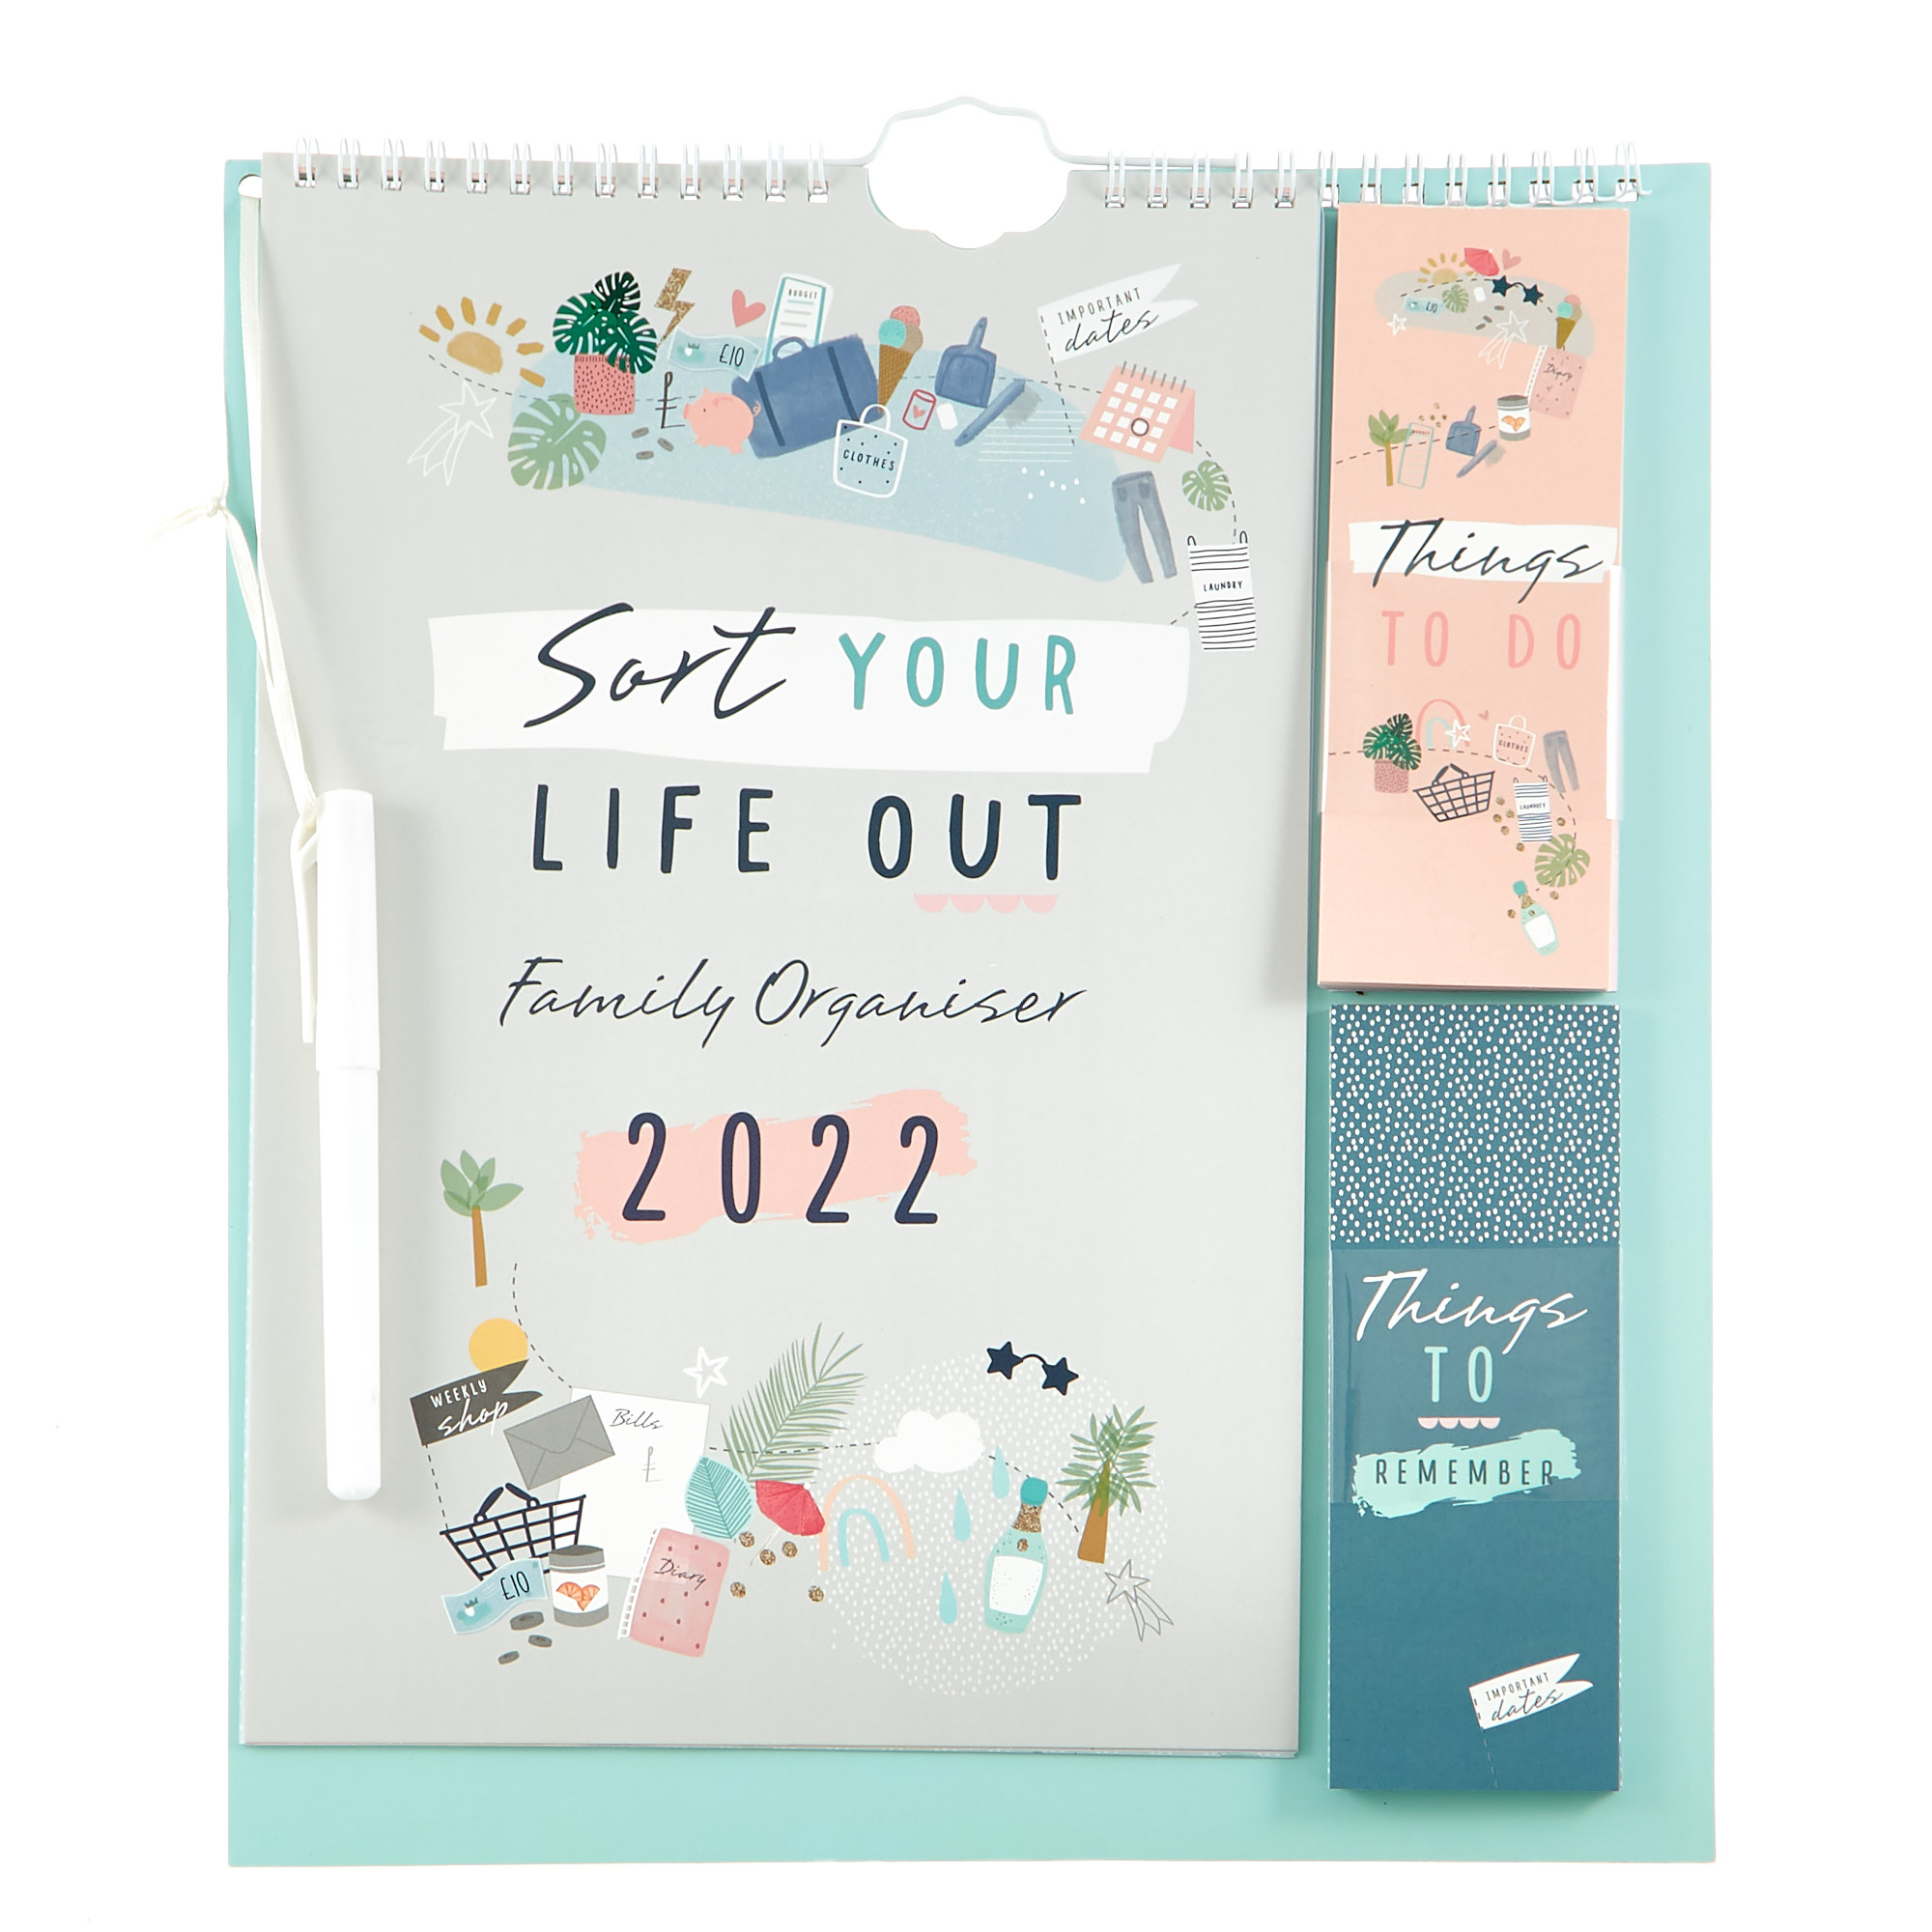 Sort your Life Out Family Organiser 2022 